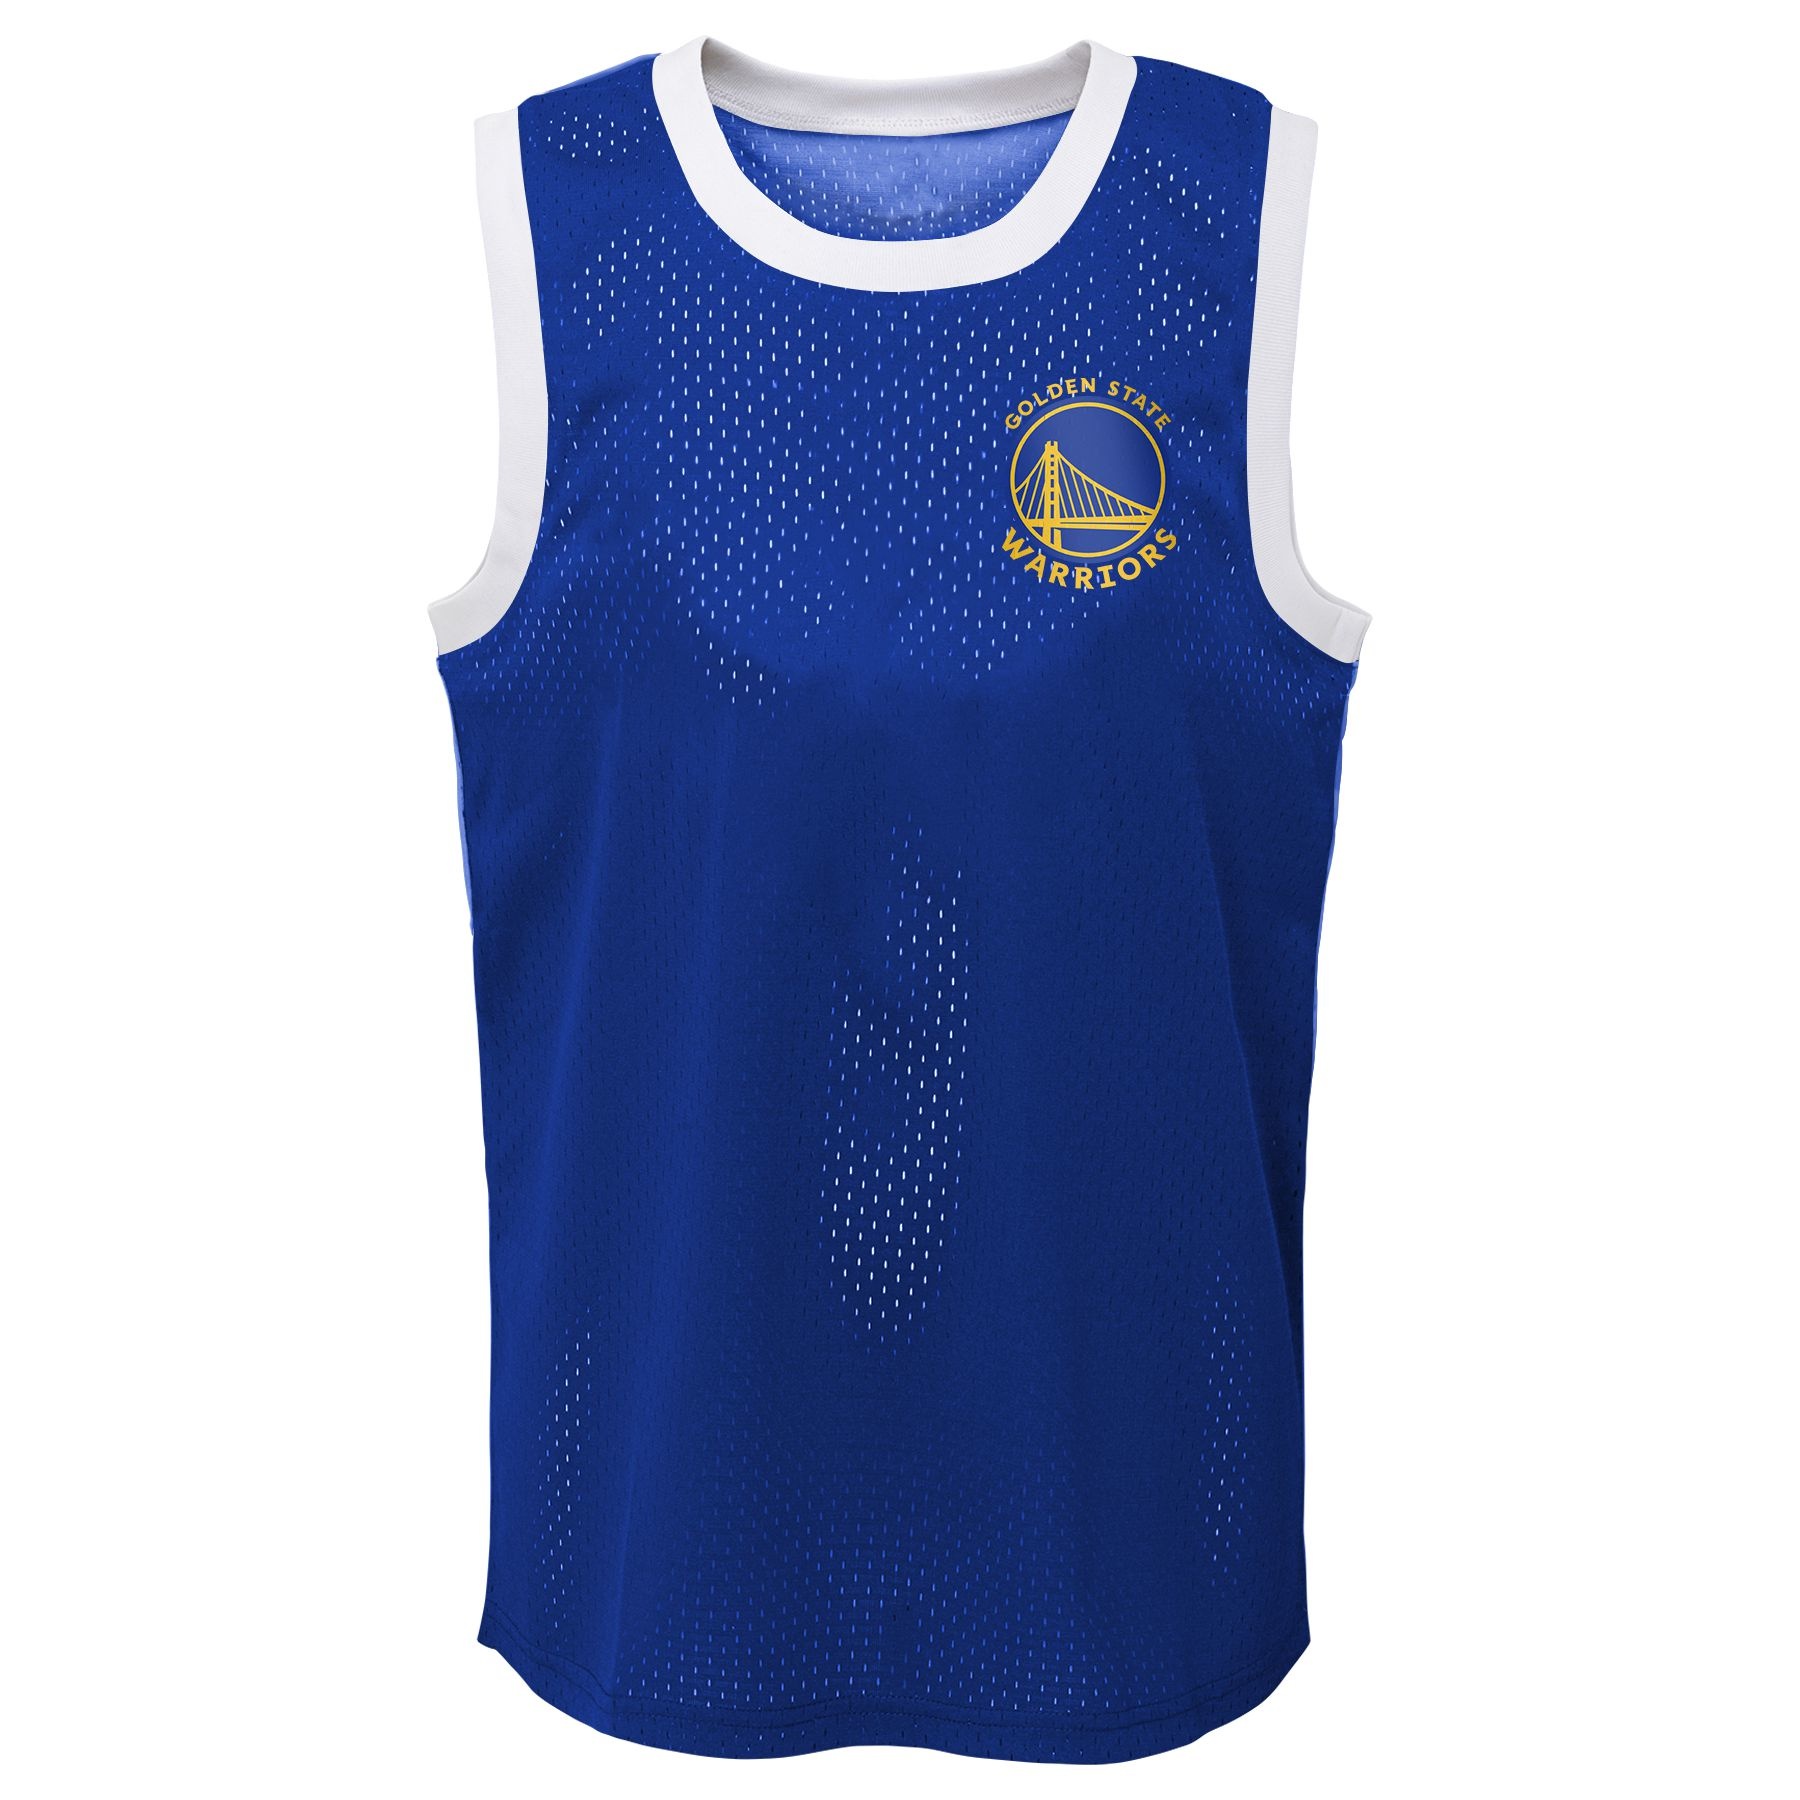 Golden State Warriors Stephen Curry Jersey Blue - Burned Sports